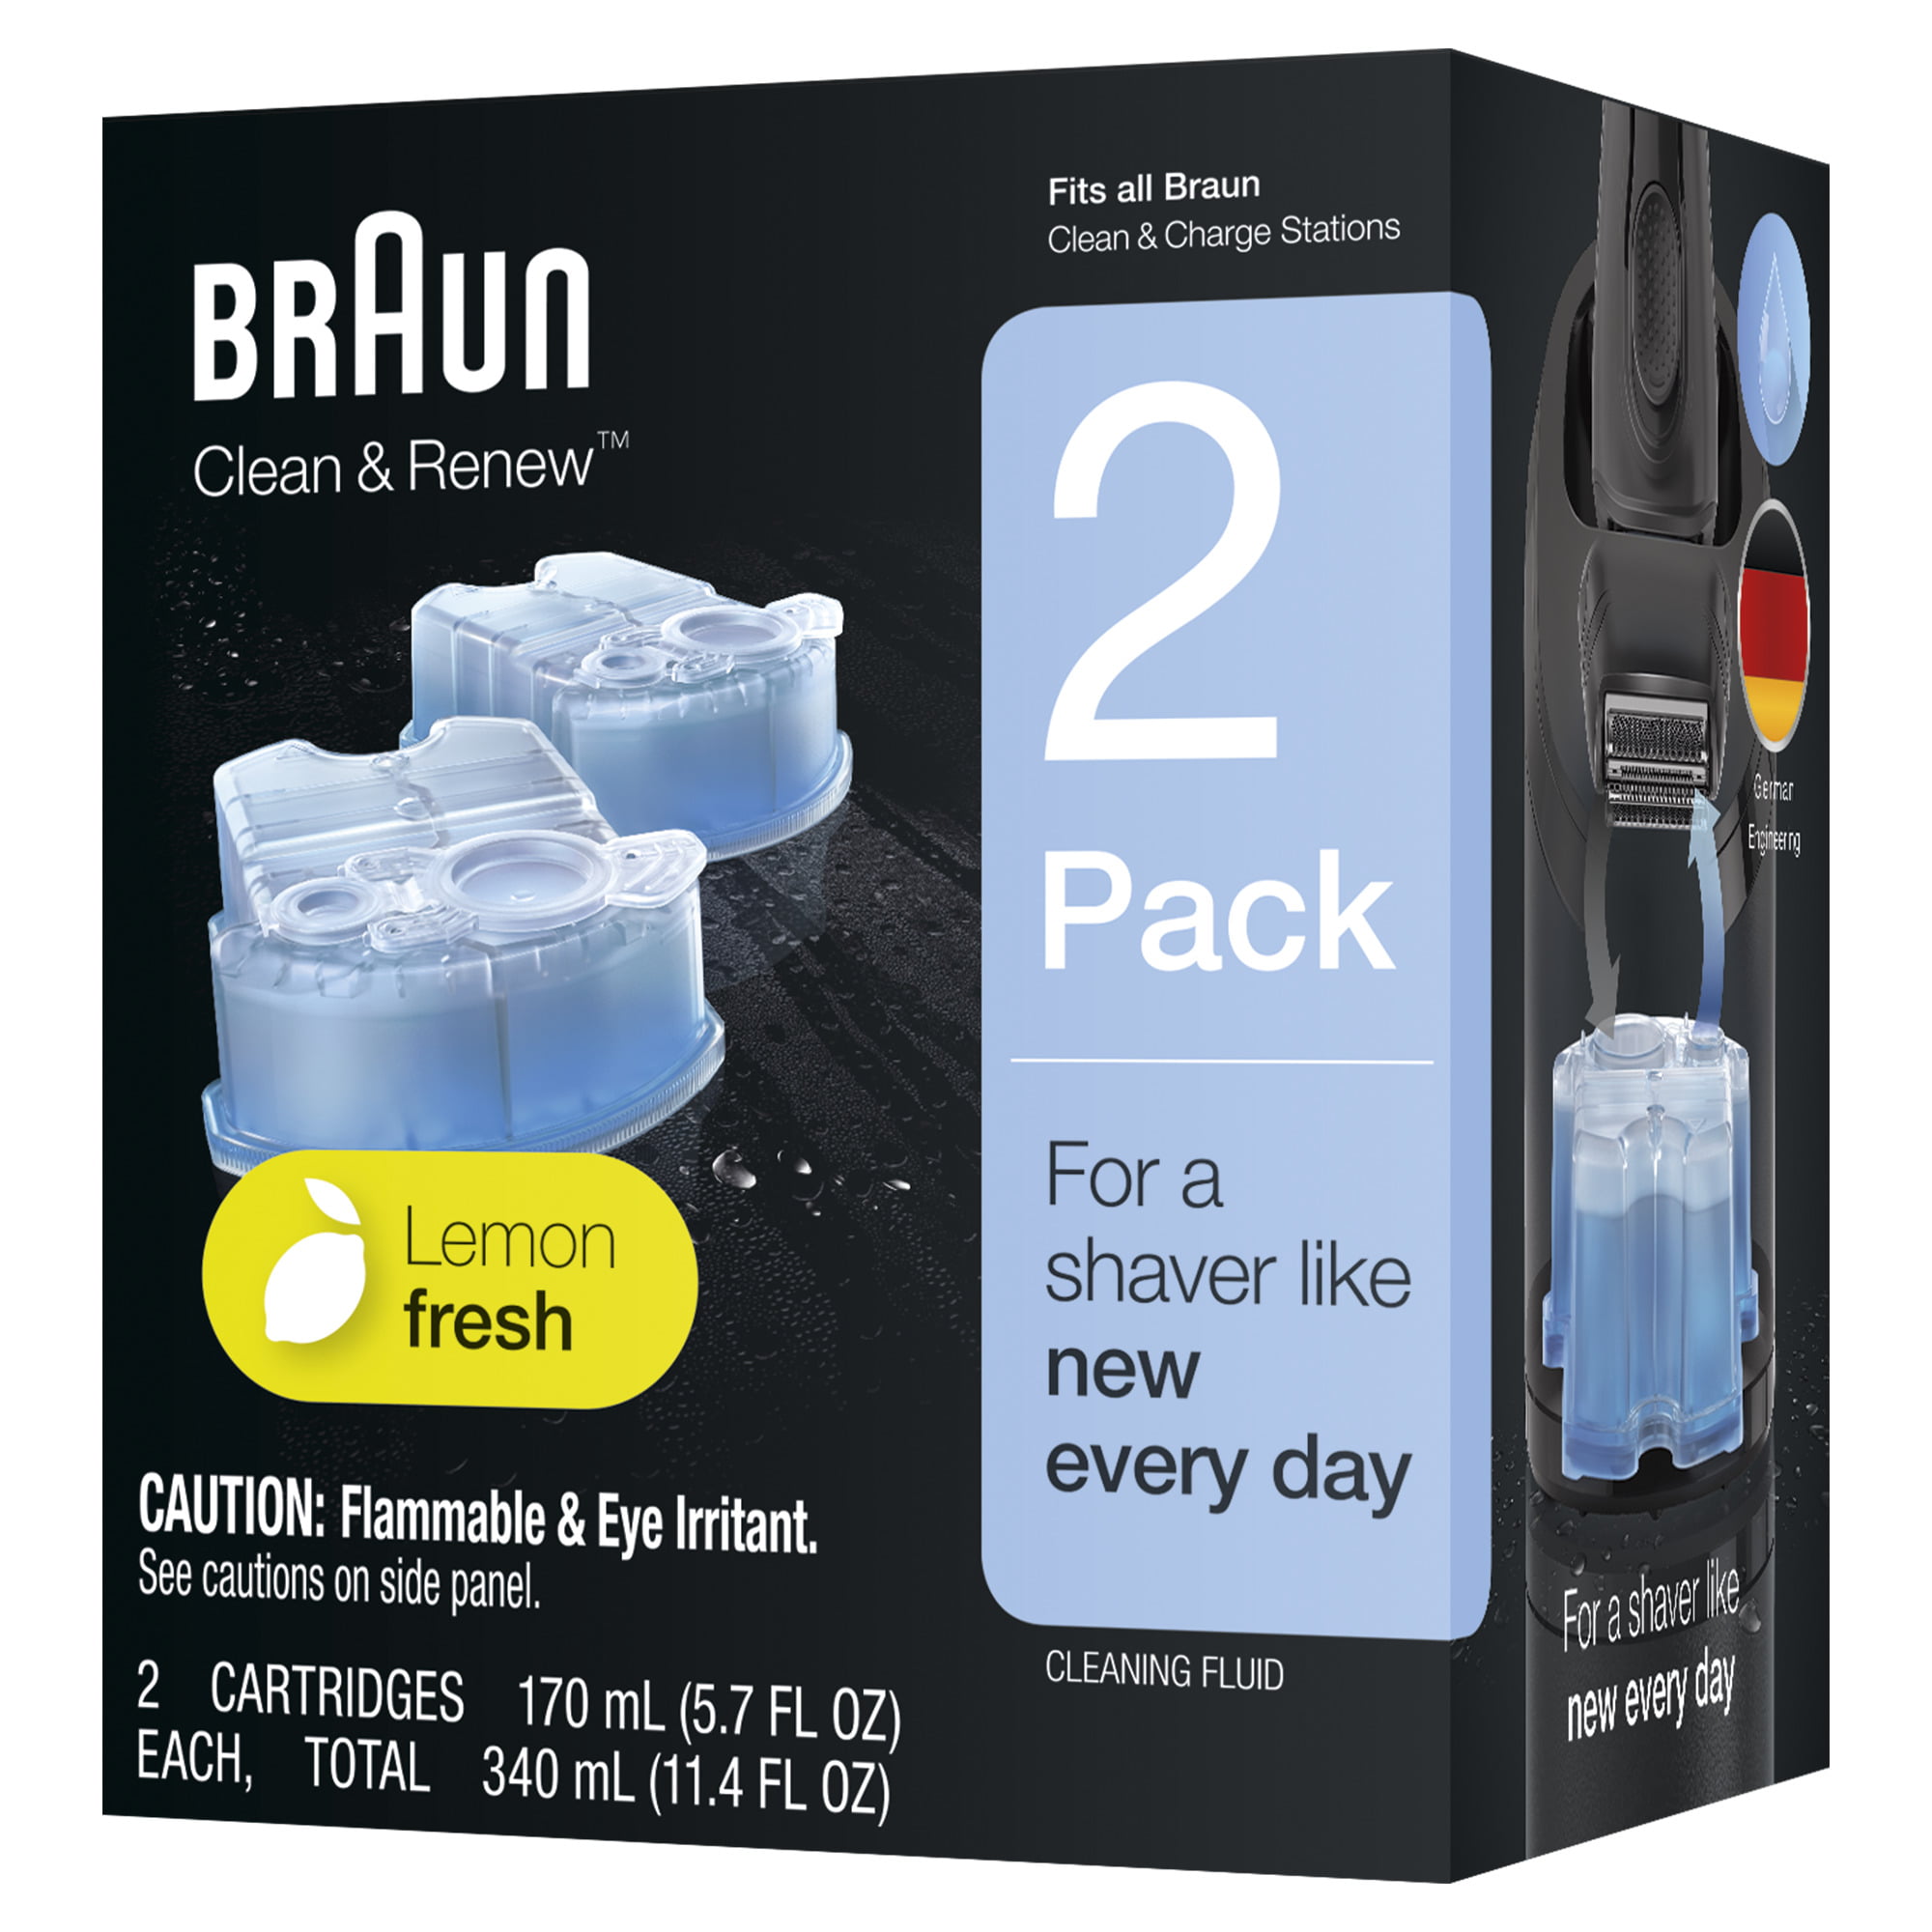 braun clean and renew cartridge instructions